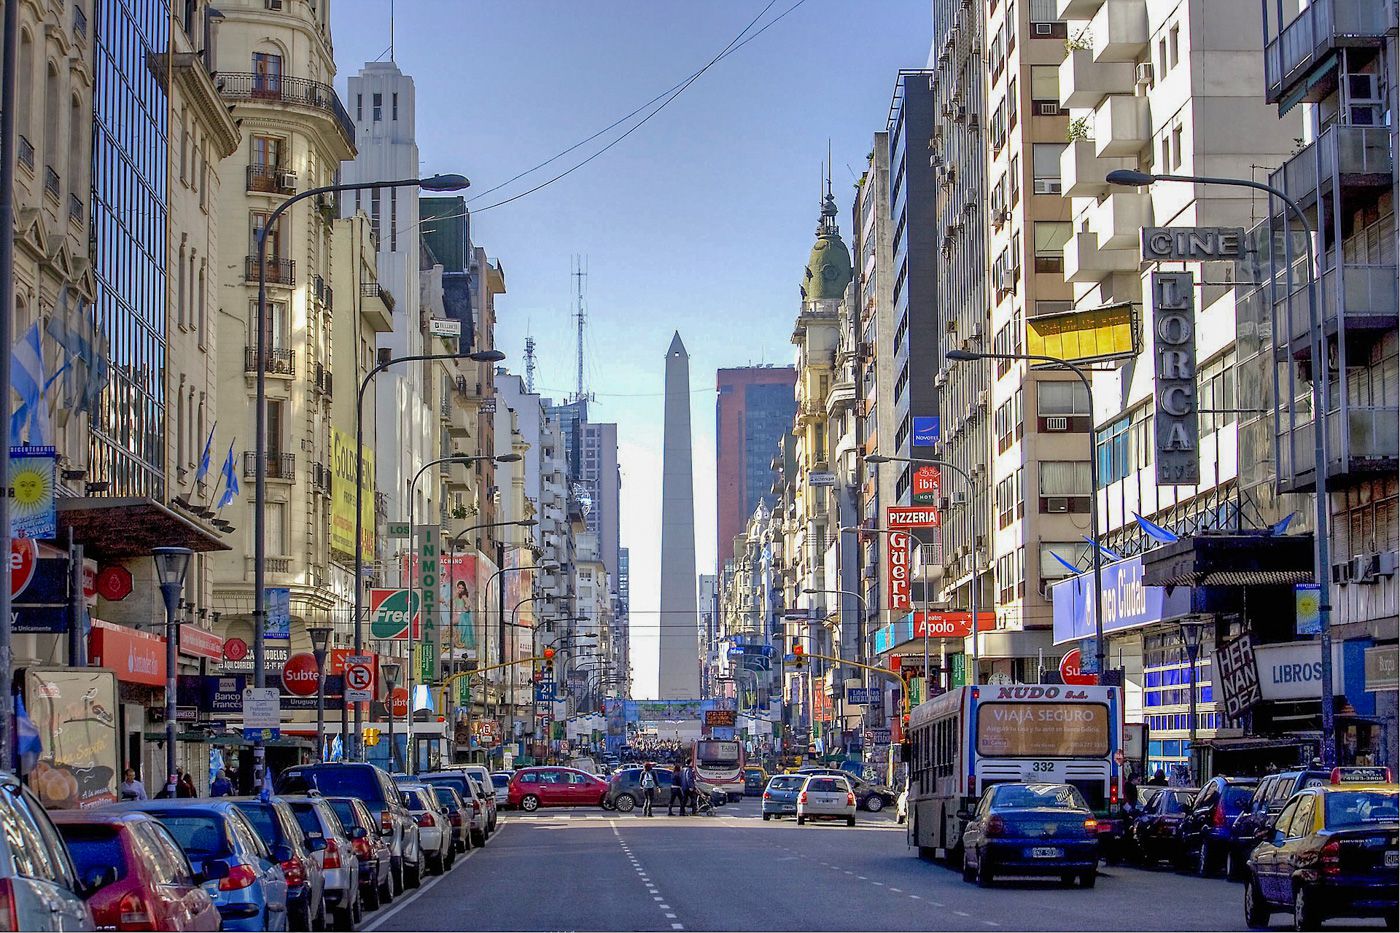 Buenos Aires, Argentina Travel Cost - Average Price of a Vacation to